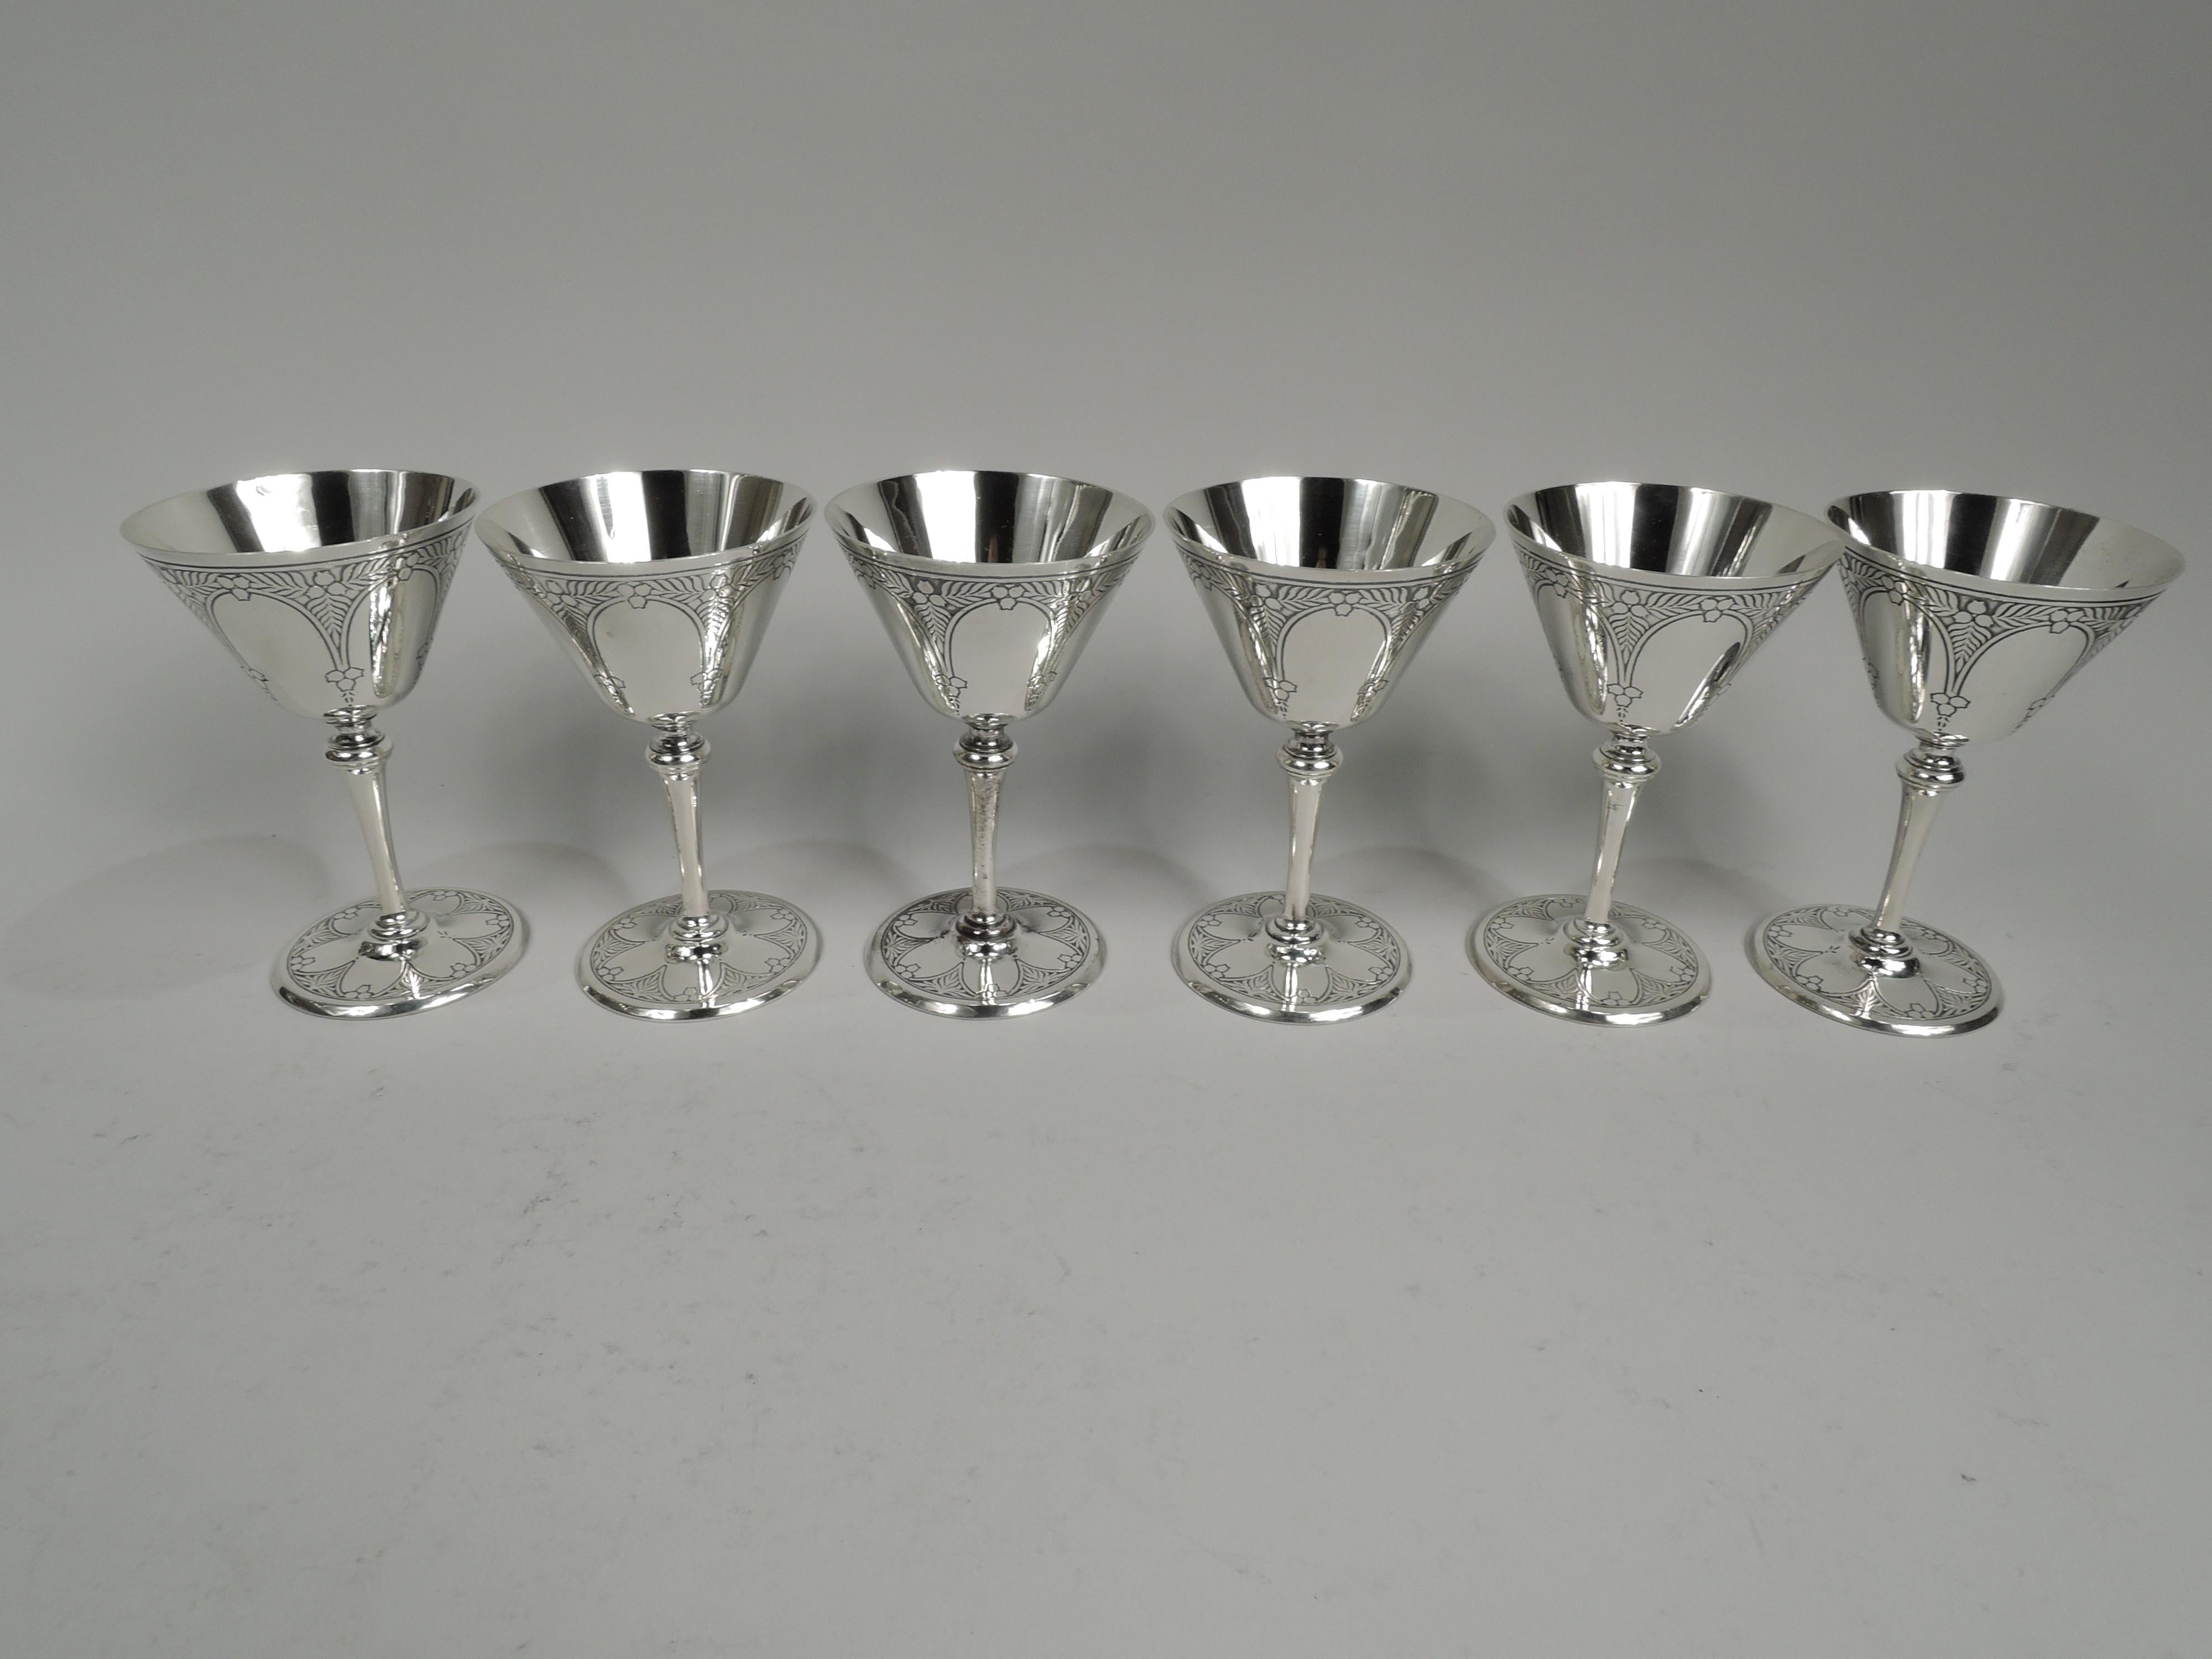 20th Century Tiffany Art Deco Bar Set with Cocktail Shaker & Cups on Tray